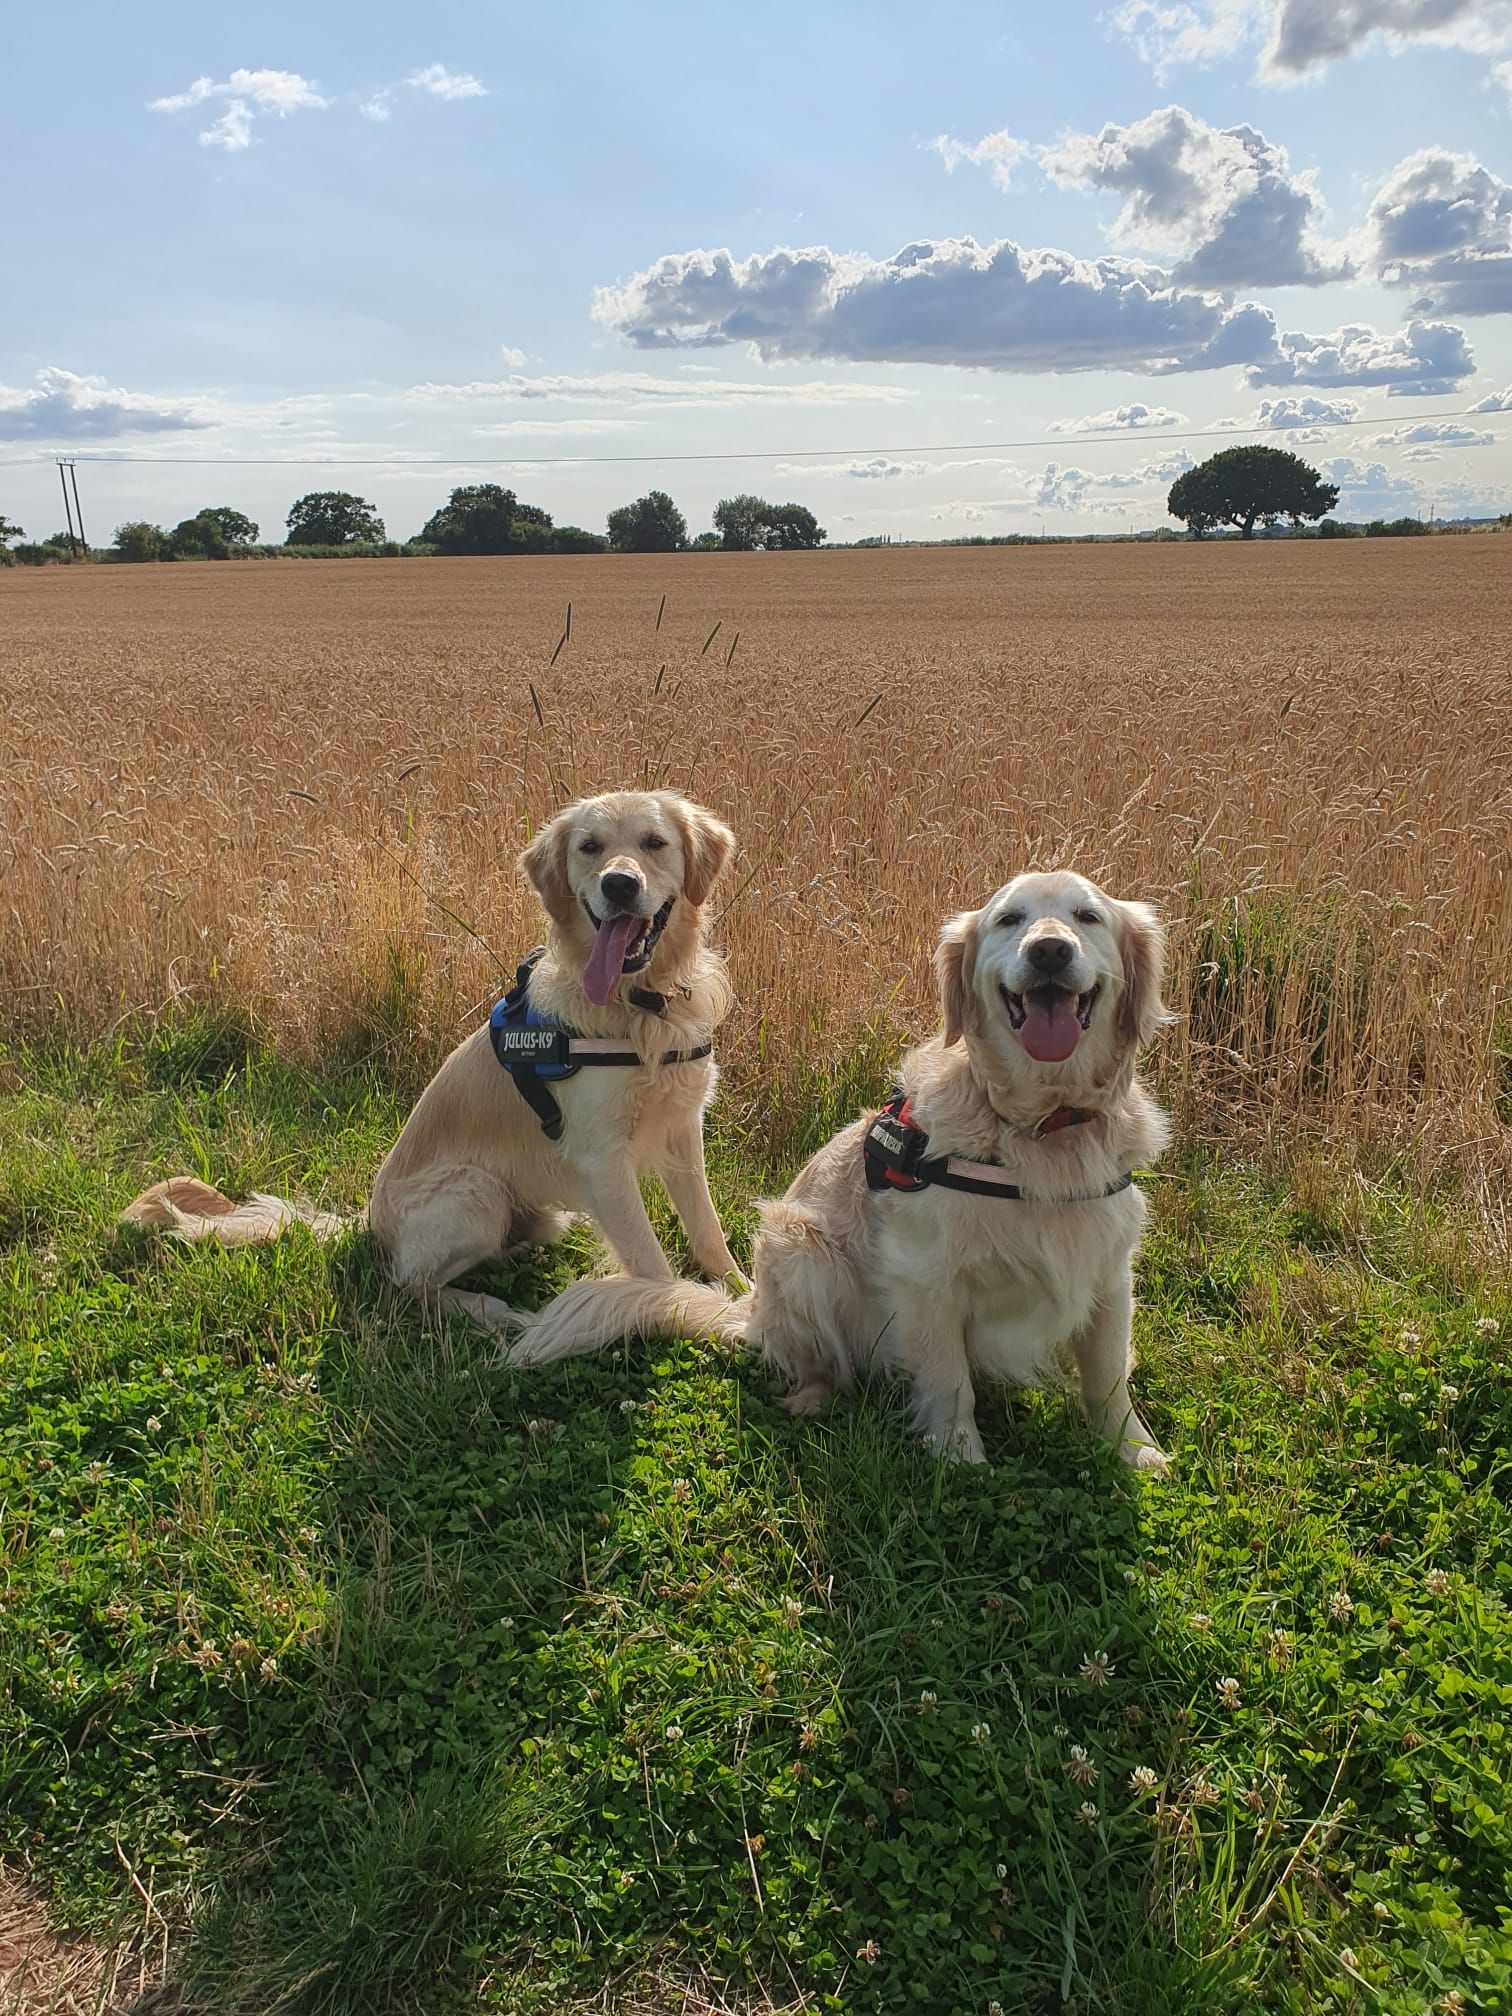 2 Golden Retrievers sitting together in a field in the sunshine